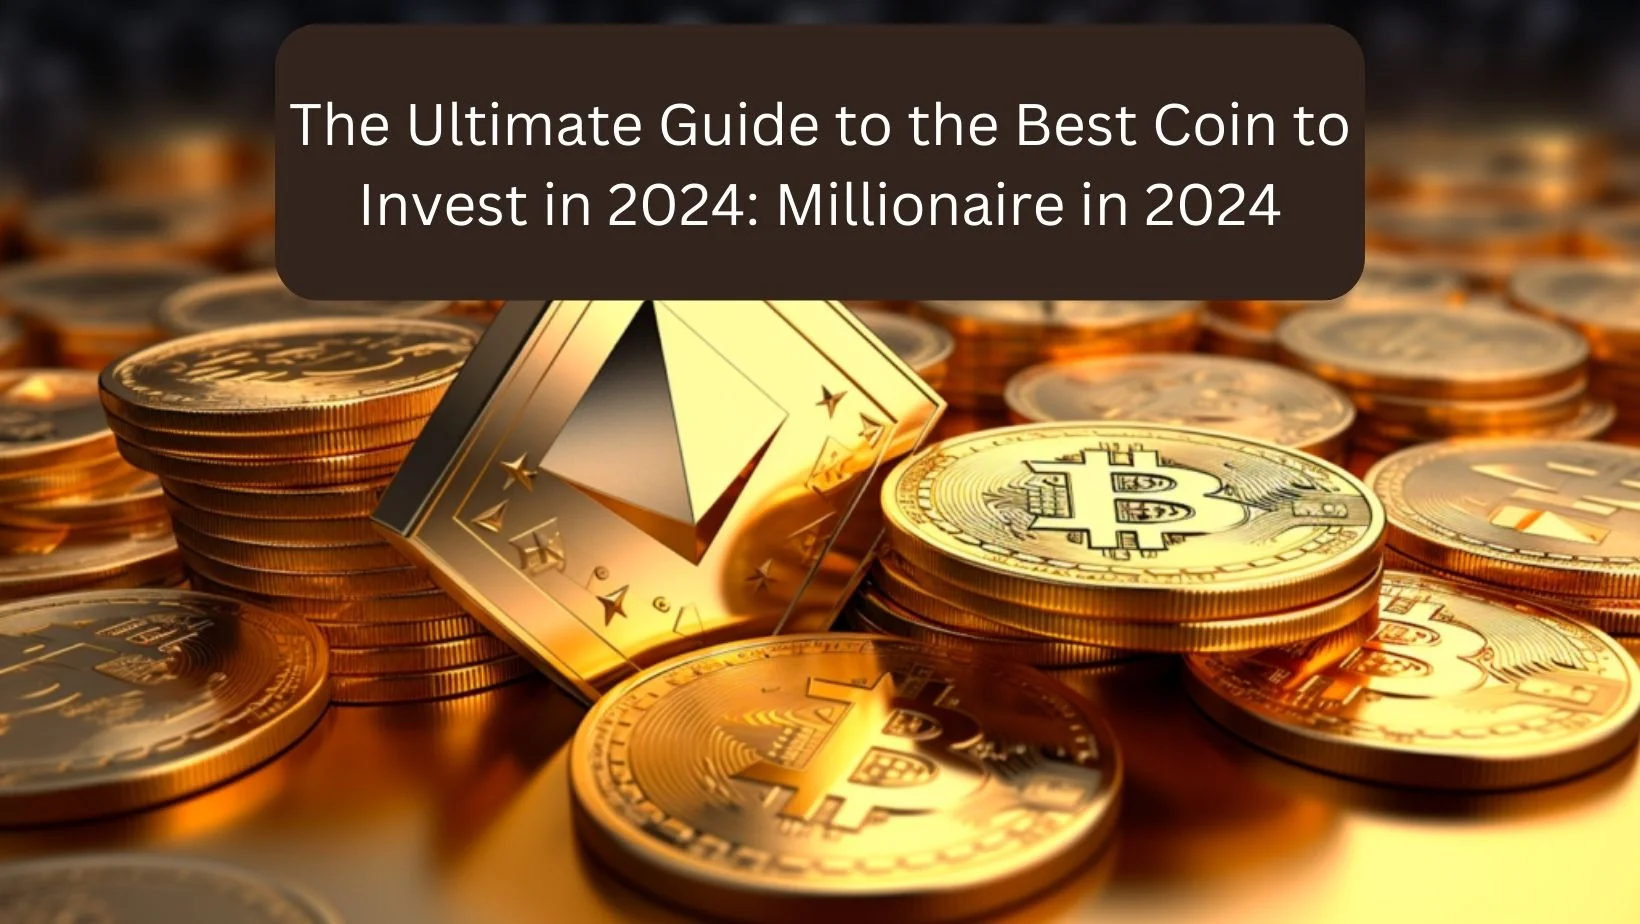 The Ultimate Guide to the Best Coin to Invest in 2024: Millionaire in 2024